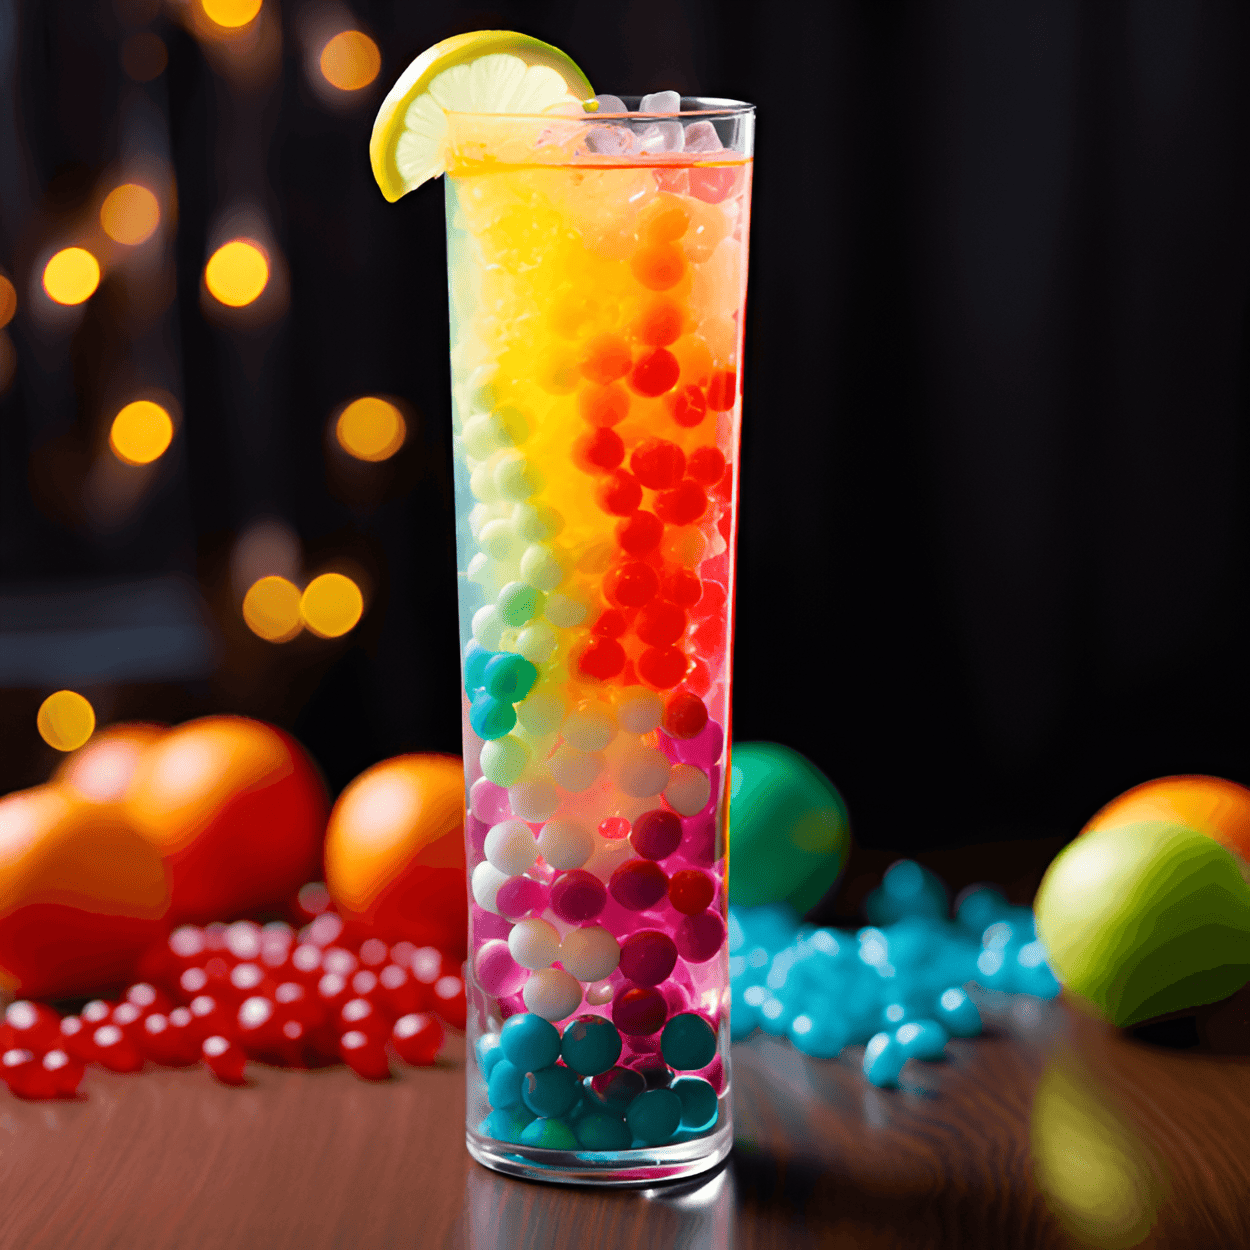 Popping Boba Cocktail Recipe - The Popping Boba Cocktail is a delightful mix of sweet, fruity, and slightly tangy flavors. The popping boba pearls add a fun, unexpected burst of flavor that enhances the overall drinking experience.